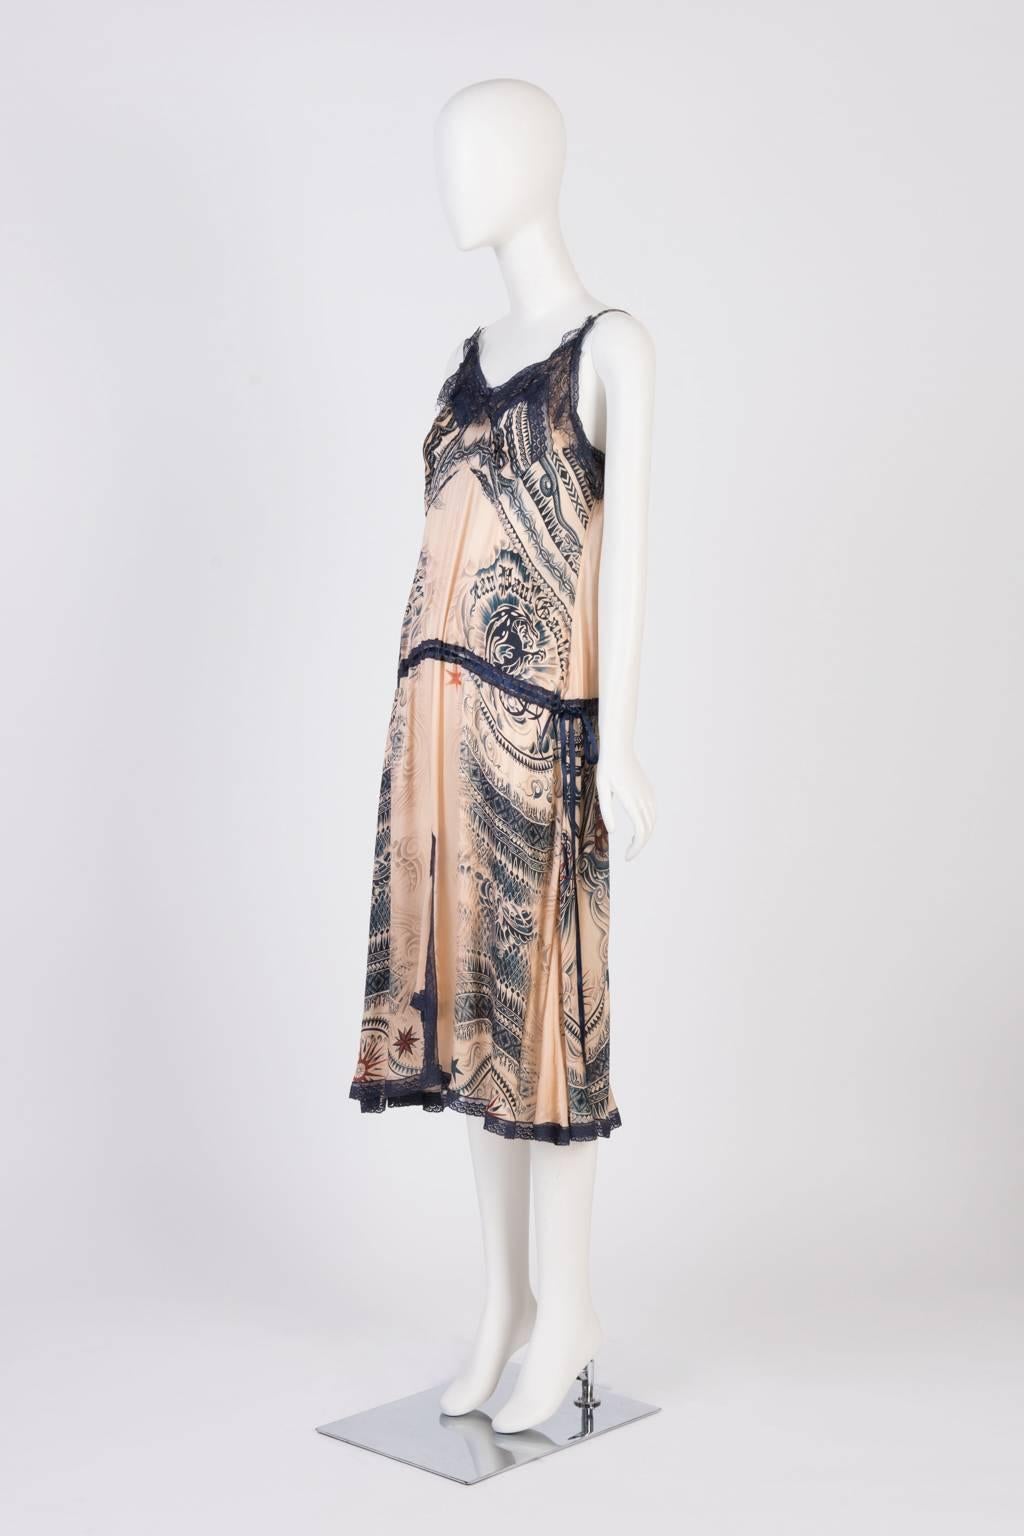 Iconic Jean Paul Gaultier tattoo print silk lingerie dress with navy lace trimmings. Adjustable shoulder straps and silk ribbon draw-string through lace panel at waist. 